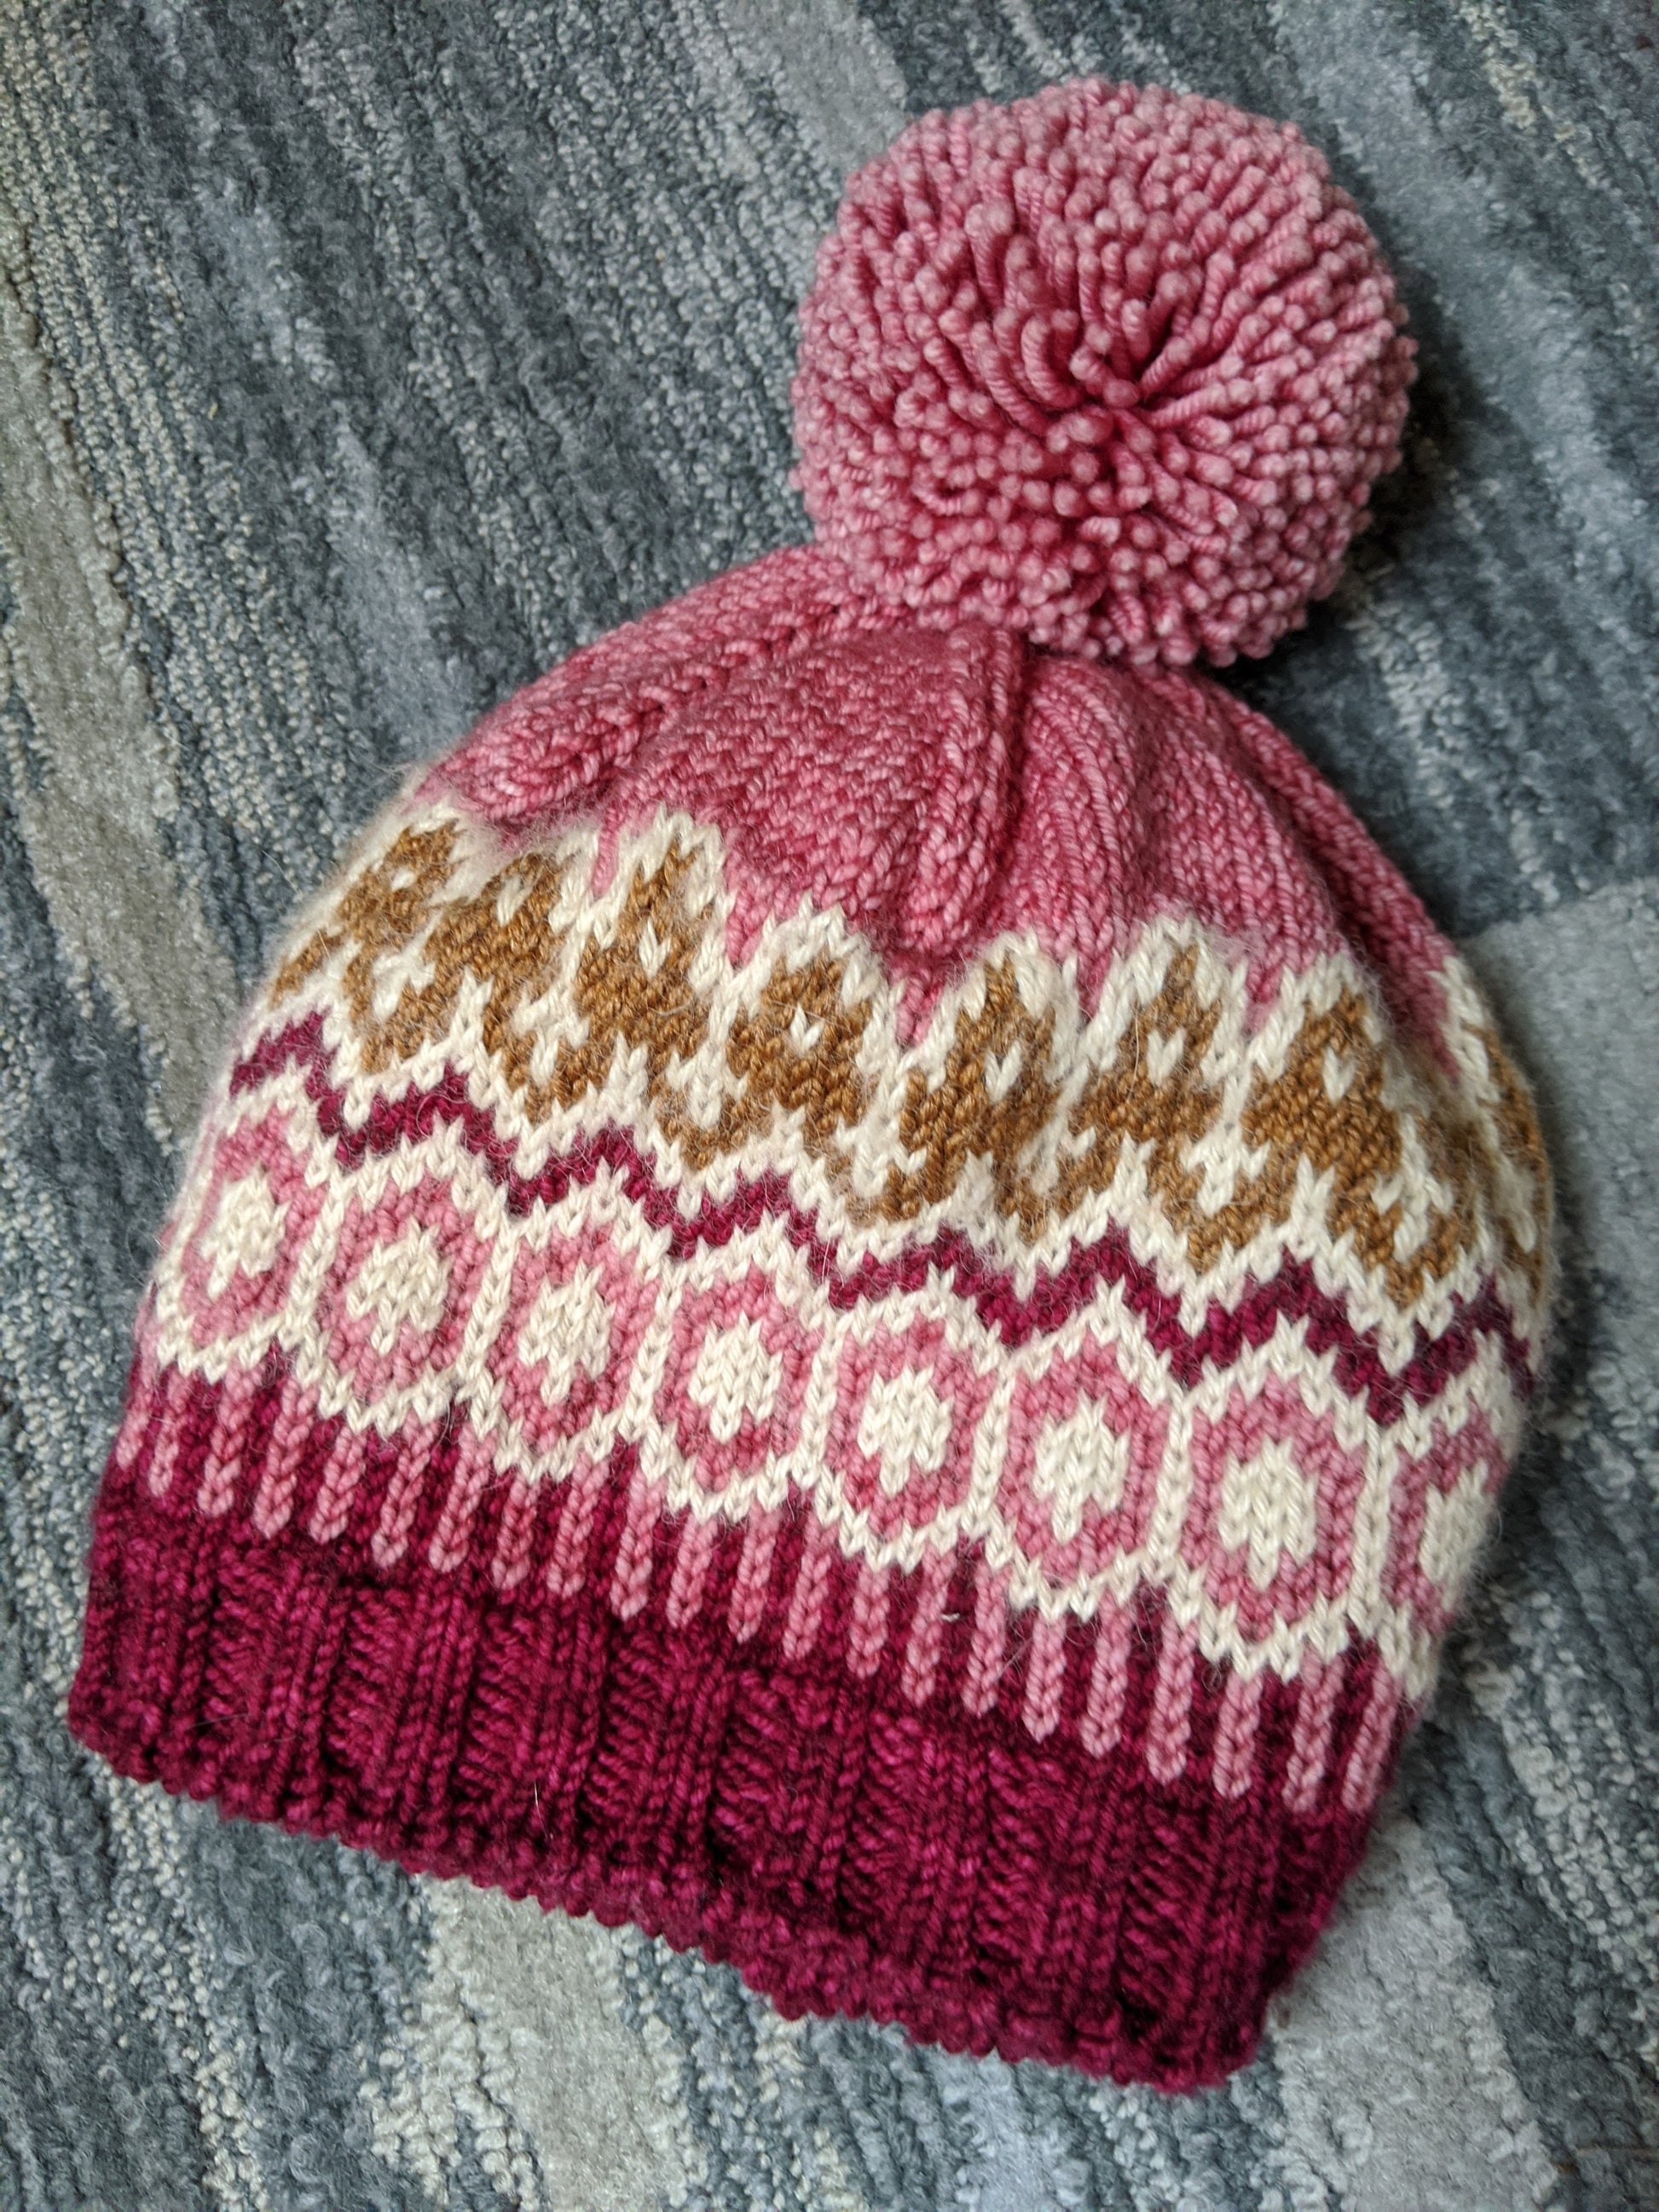 A knit beanie, made from light pink, white, brown, and dark pink hat, lays on a rug. It's made with a yarn bobble on top.